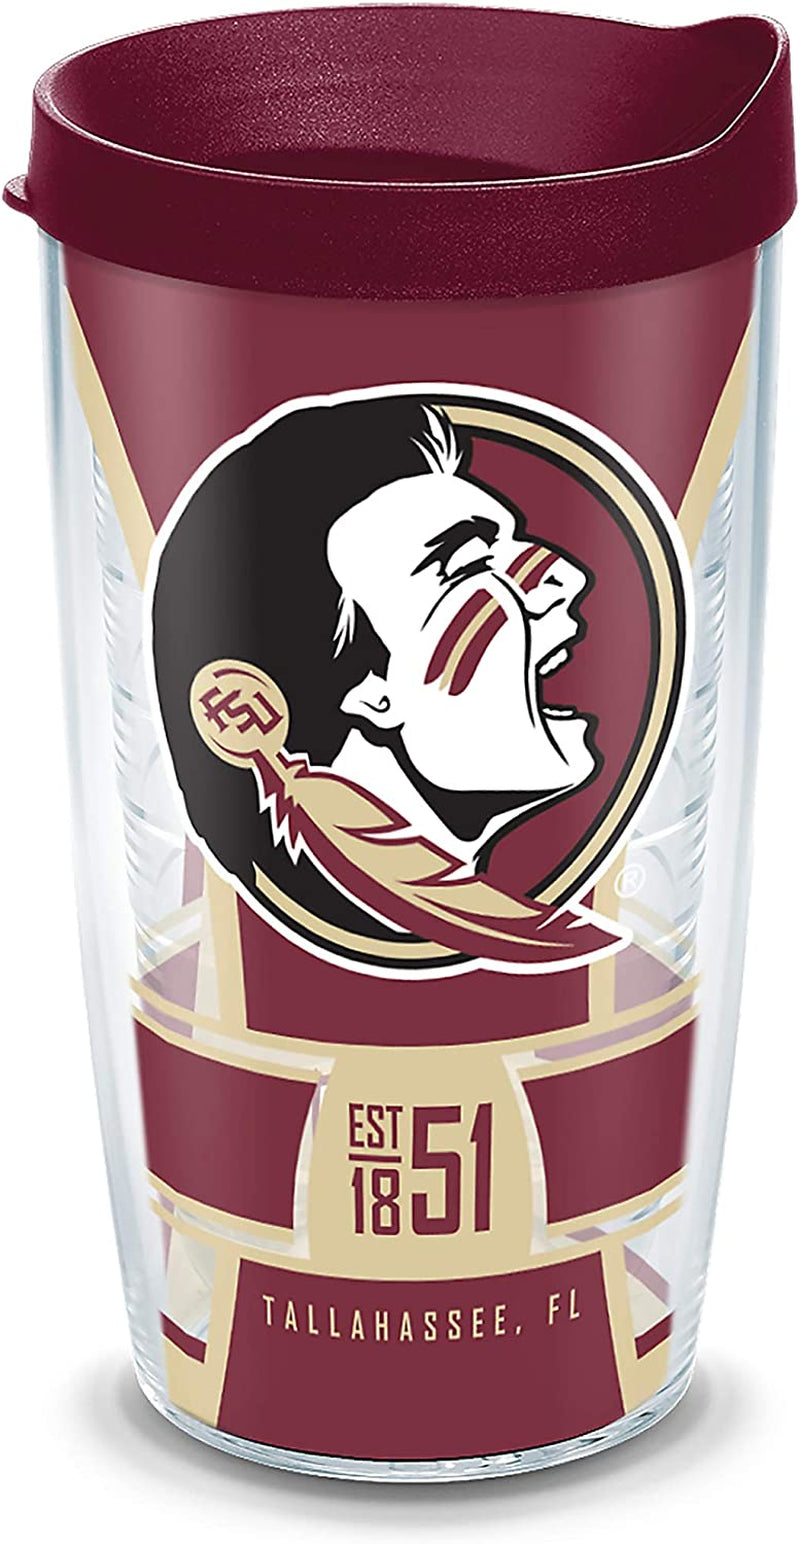 Tervis Made in USA Double Walled Florida State University FSU Seminoles Insulated Tumbler Cup Keeps Drinks Cold & Hot, 16Oz, Spirit